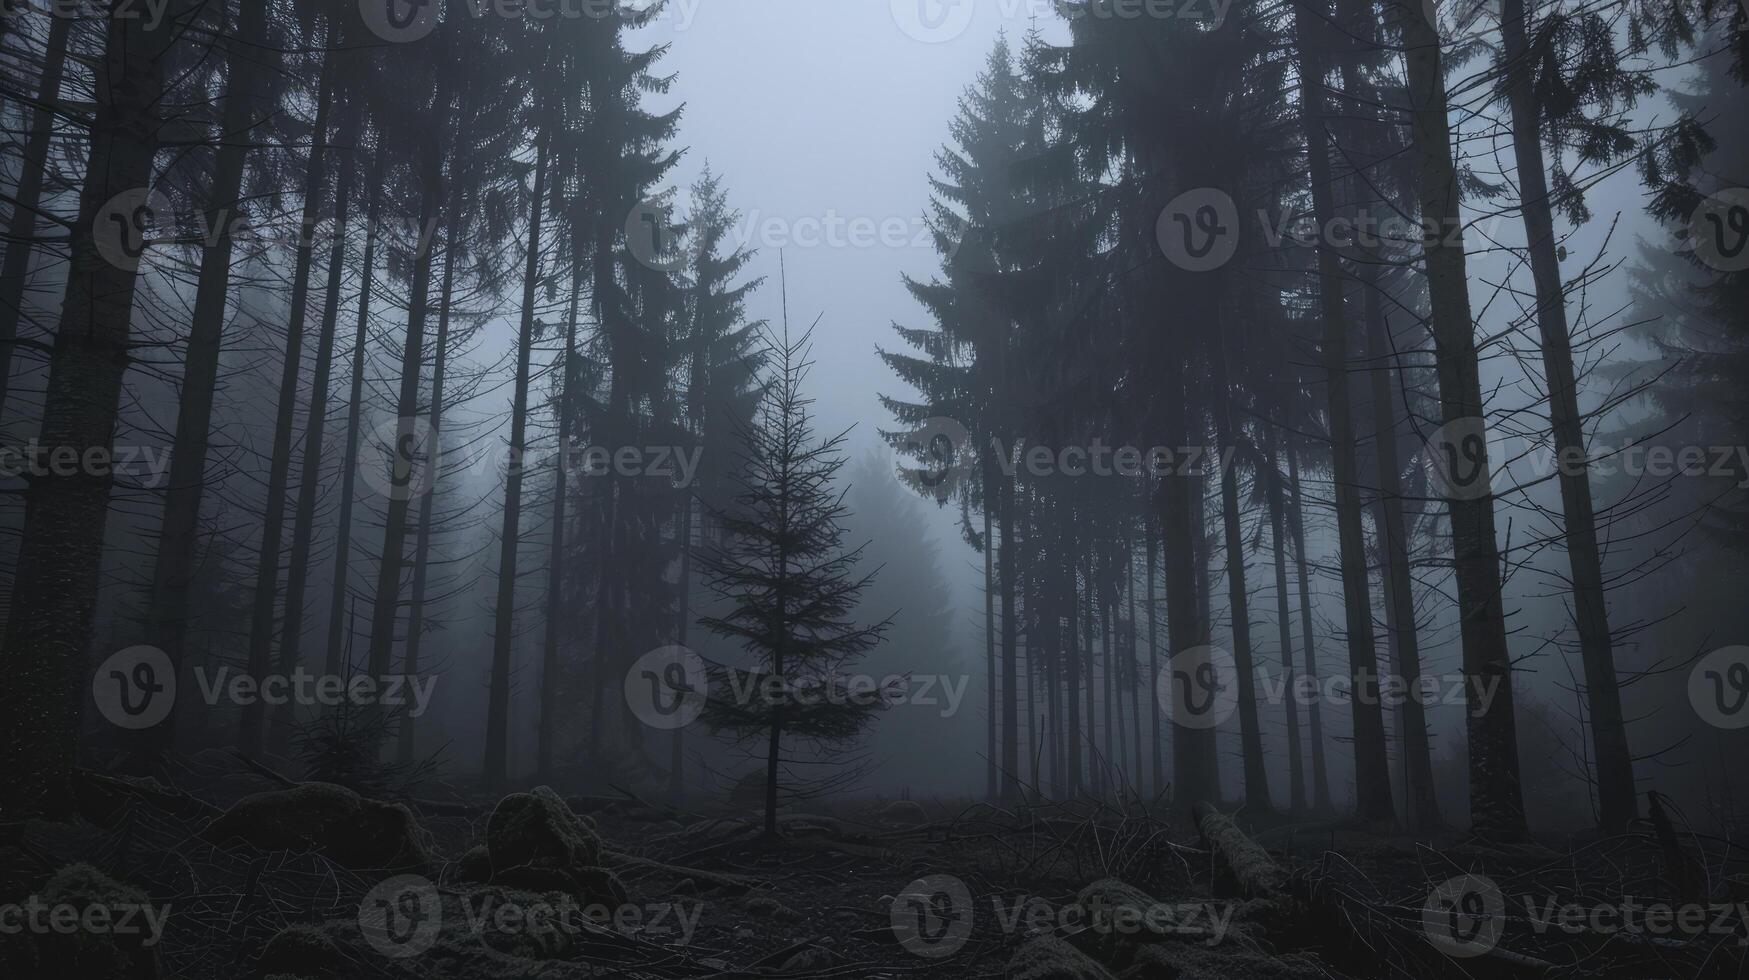 Details of cool forest photo